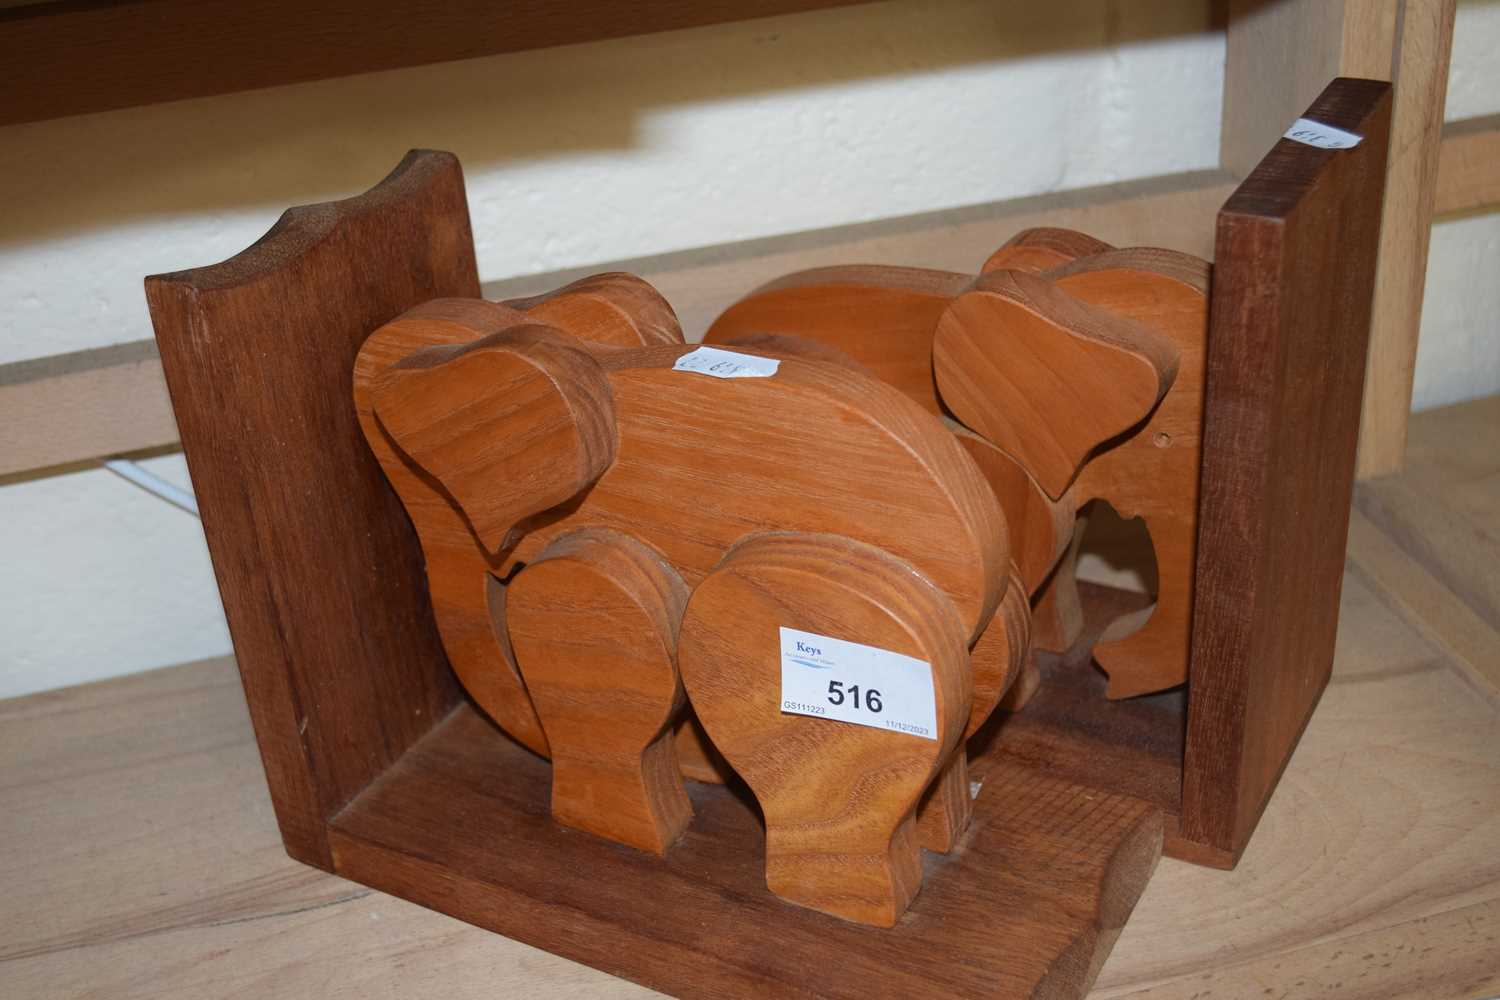 A pair of wooden elephant book ends